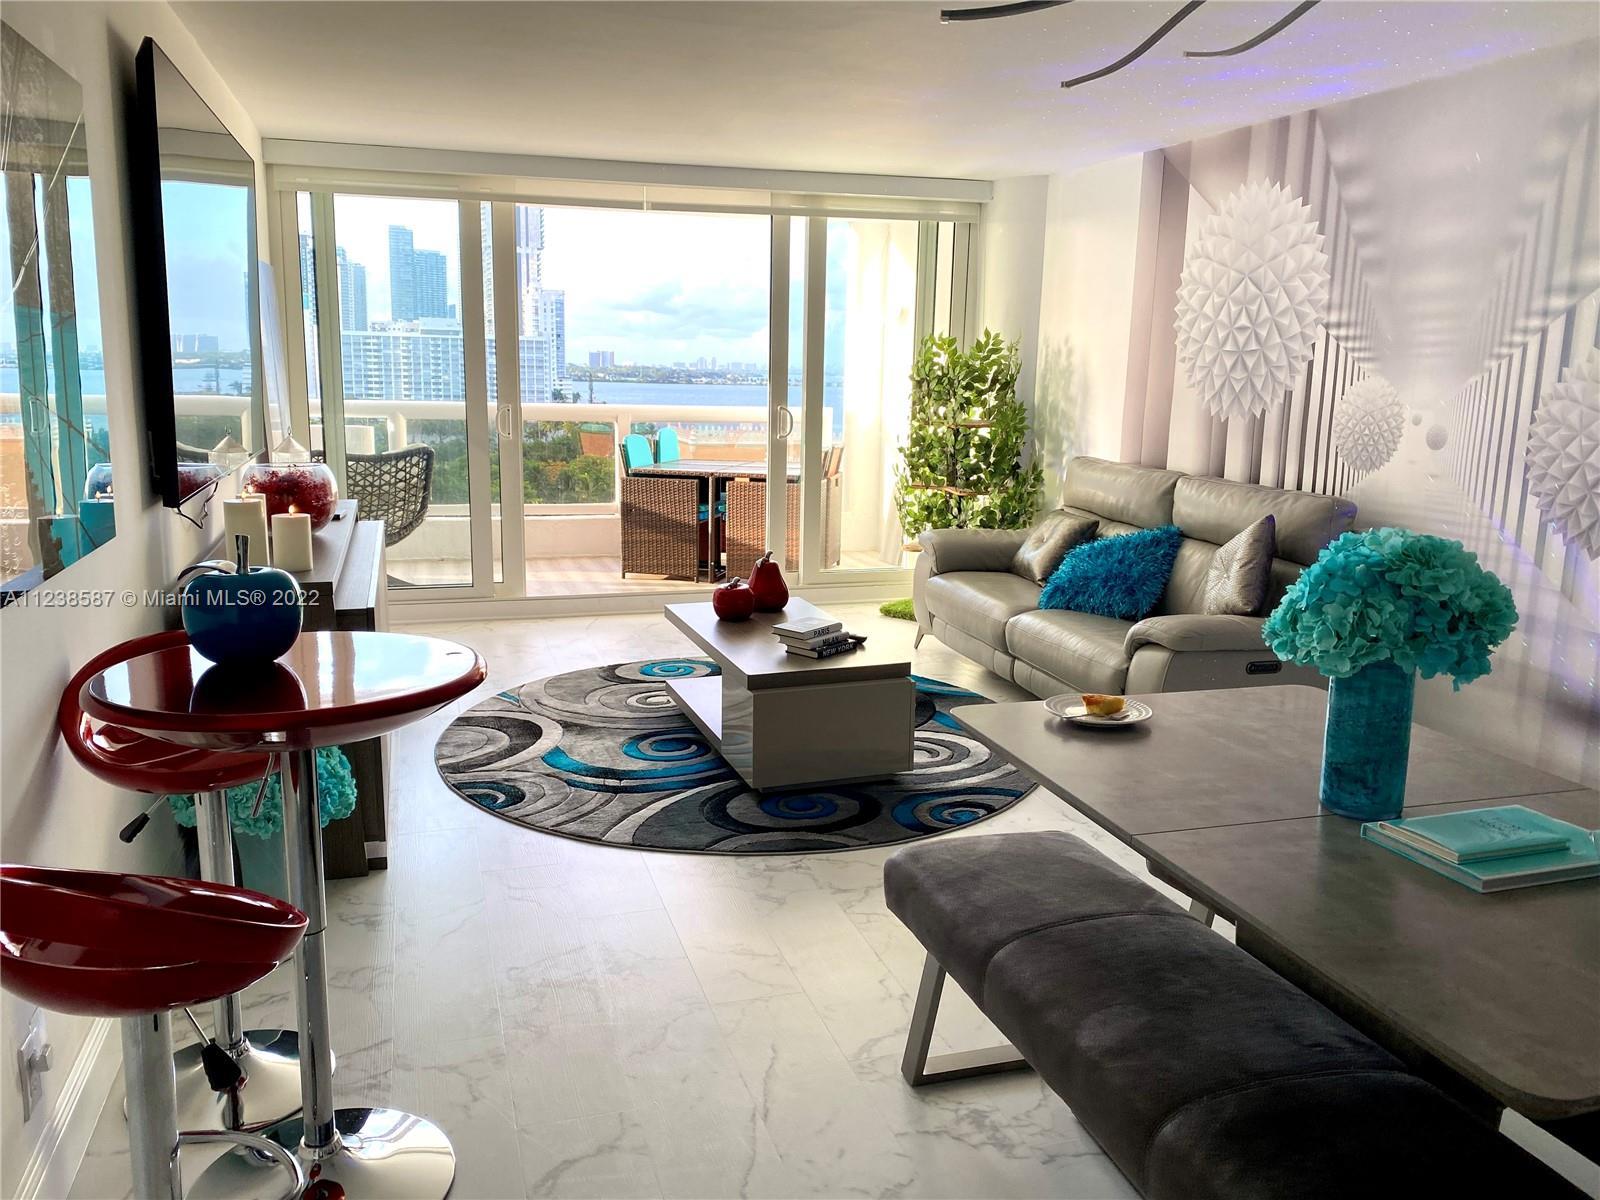 Turn-key, beautifully decorated, state-of-the-art, luxurious apartment with a stunning bay view.  To